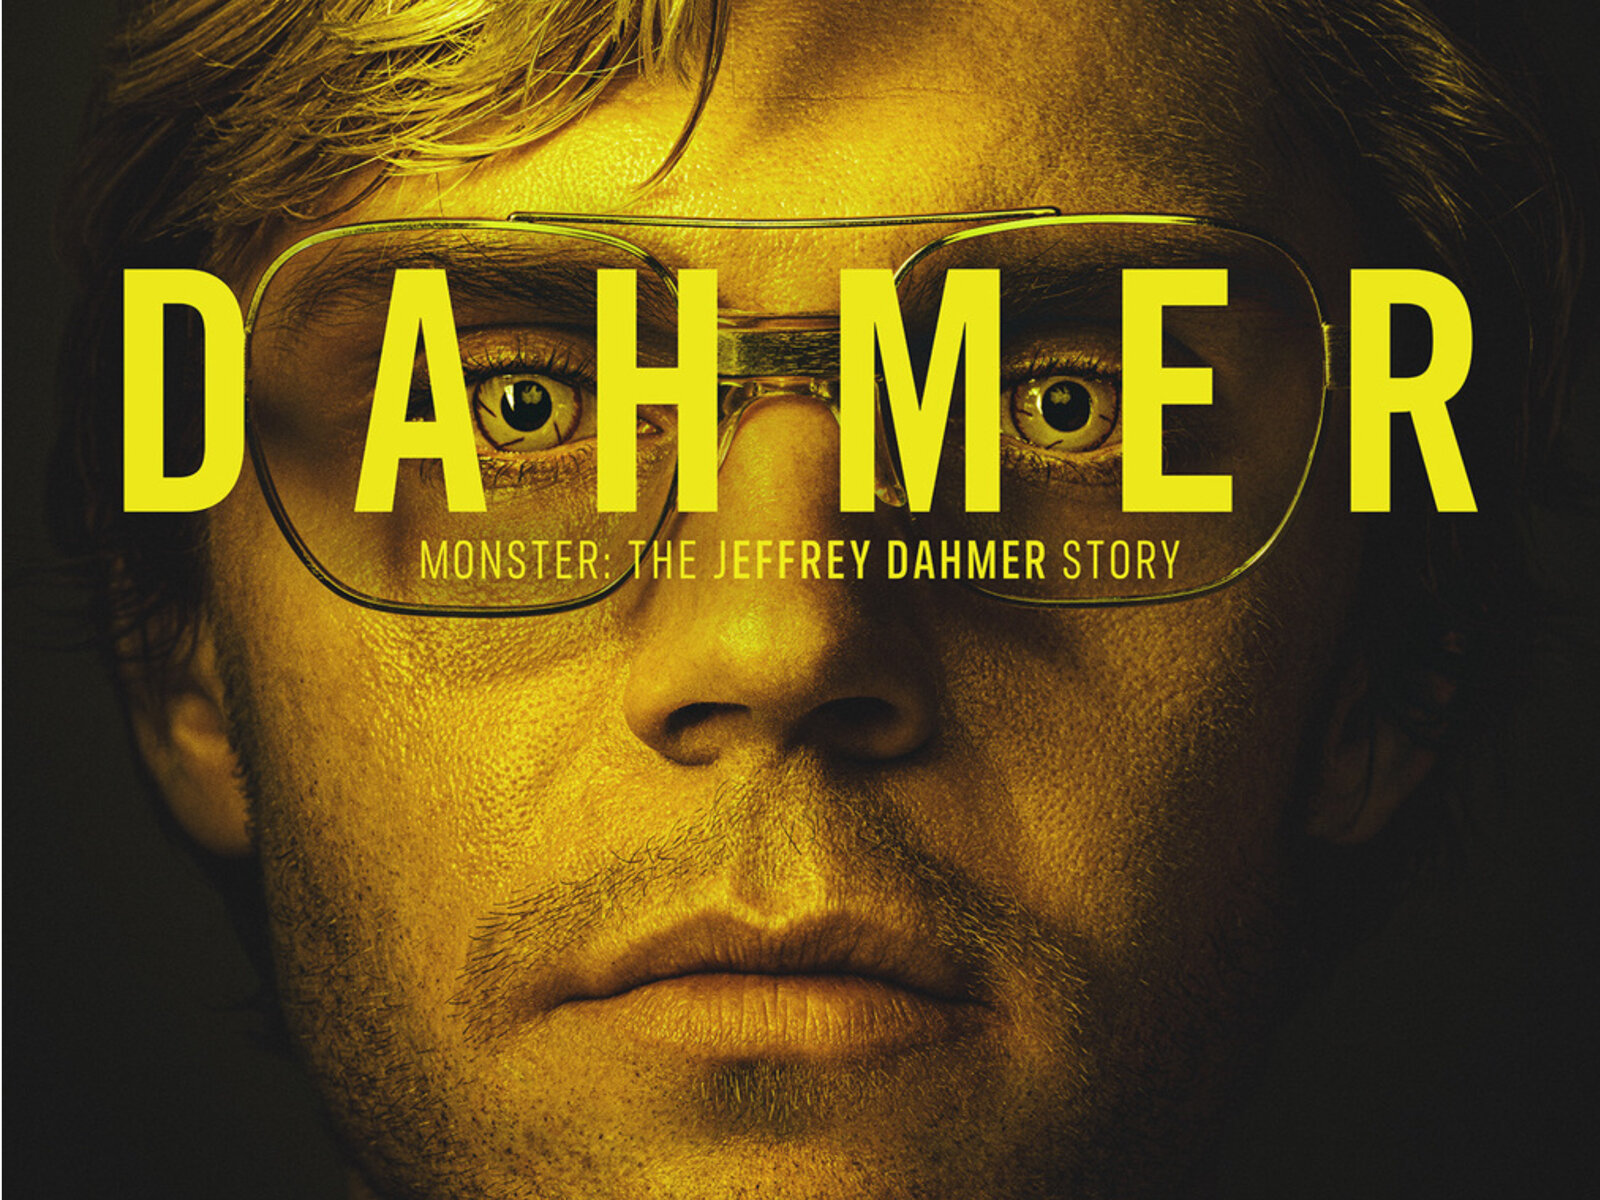 Not more Dahmer: 5 reasons why Netflix's Monster might actually